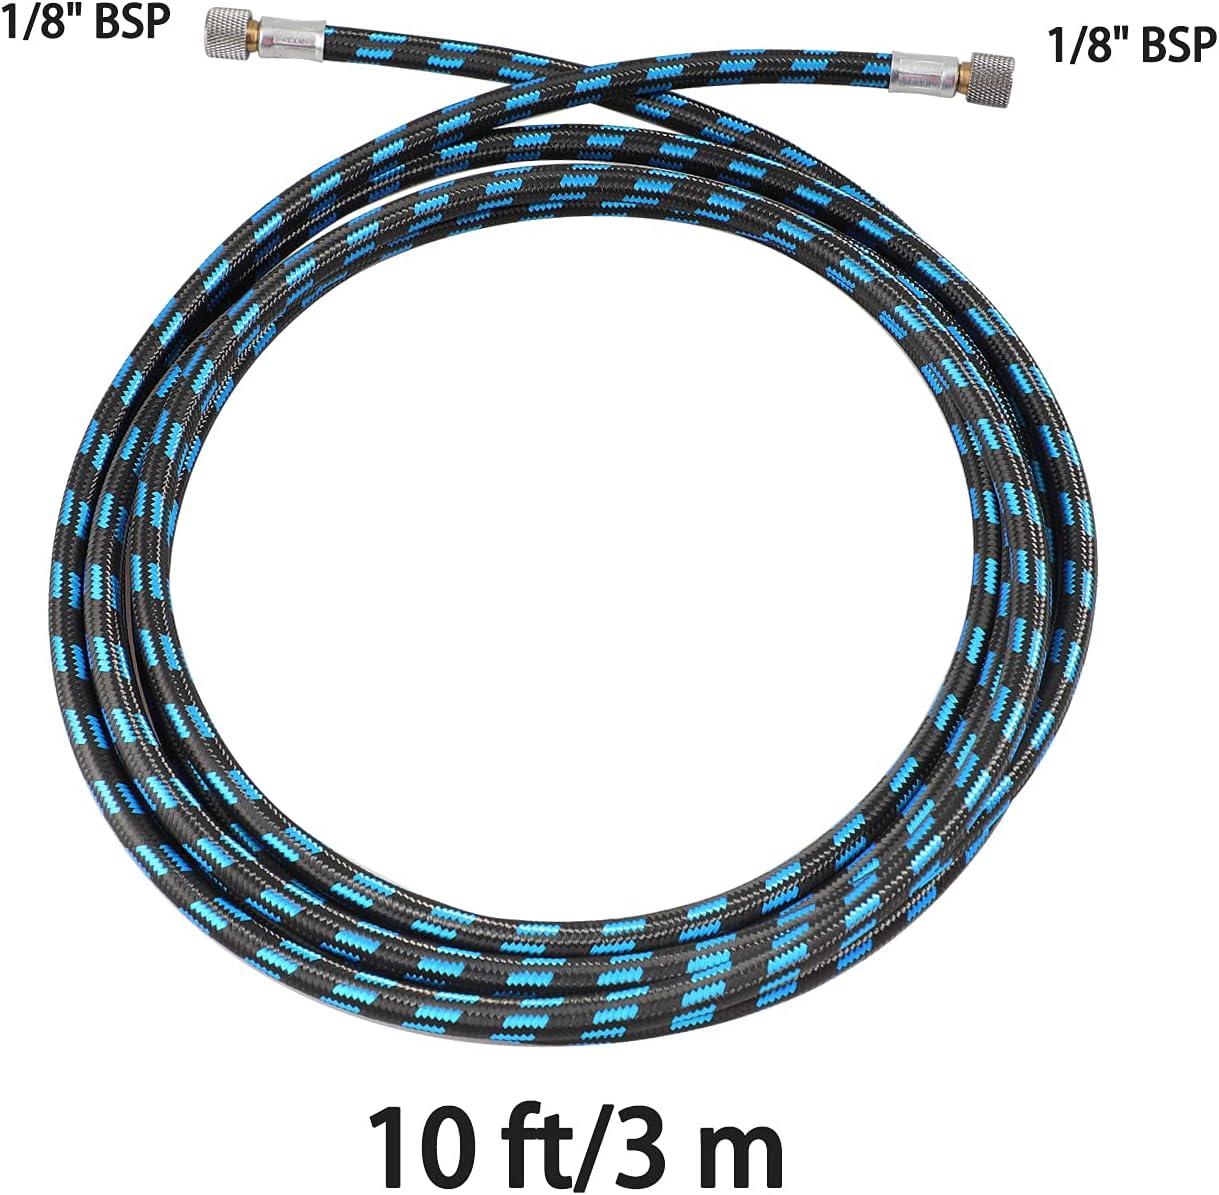  PointZero Airbrush 10' Braided Airbrush Air Hose - 1/8 in. BSP  : Arts, Crafts & Sewing